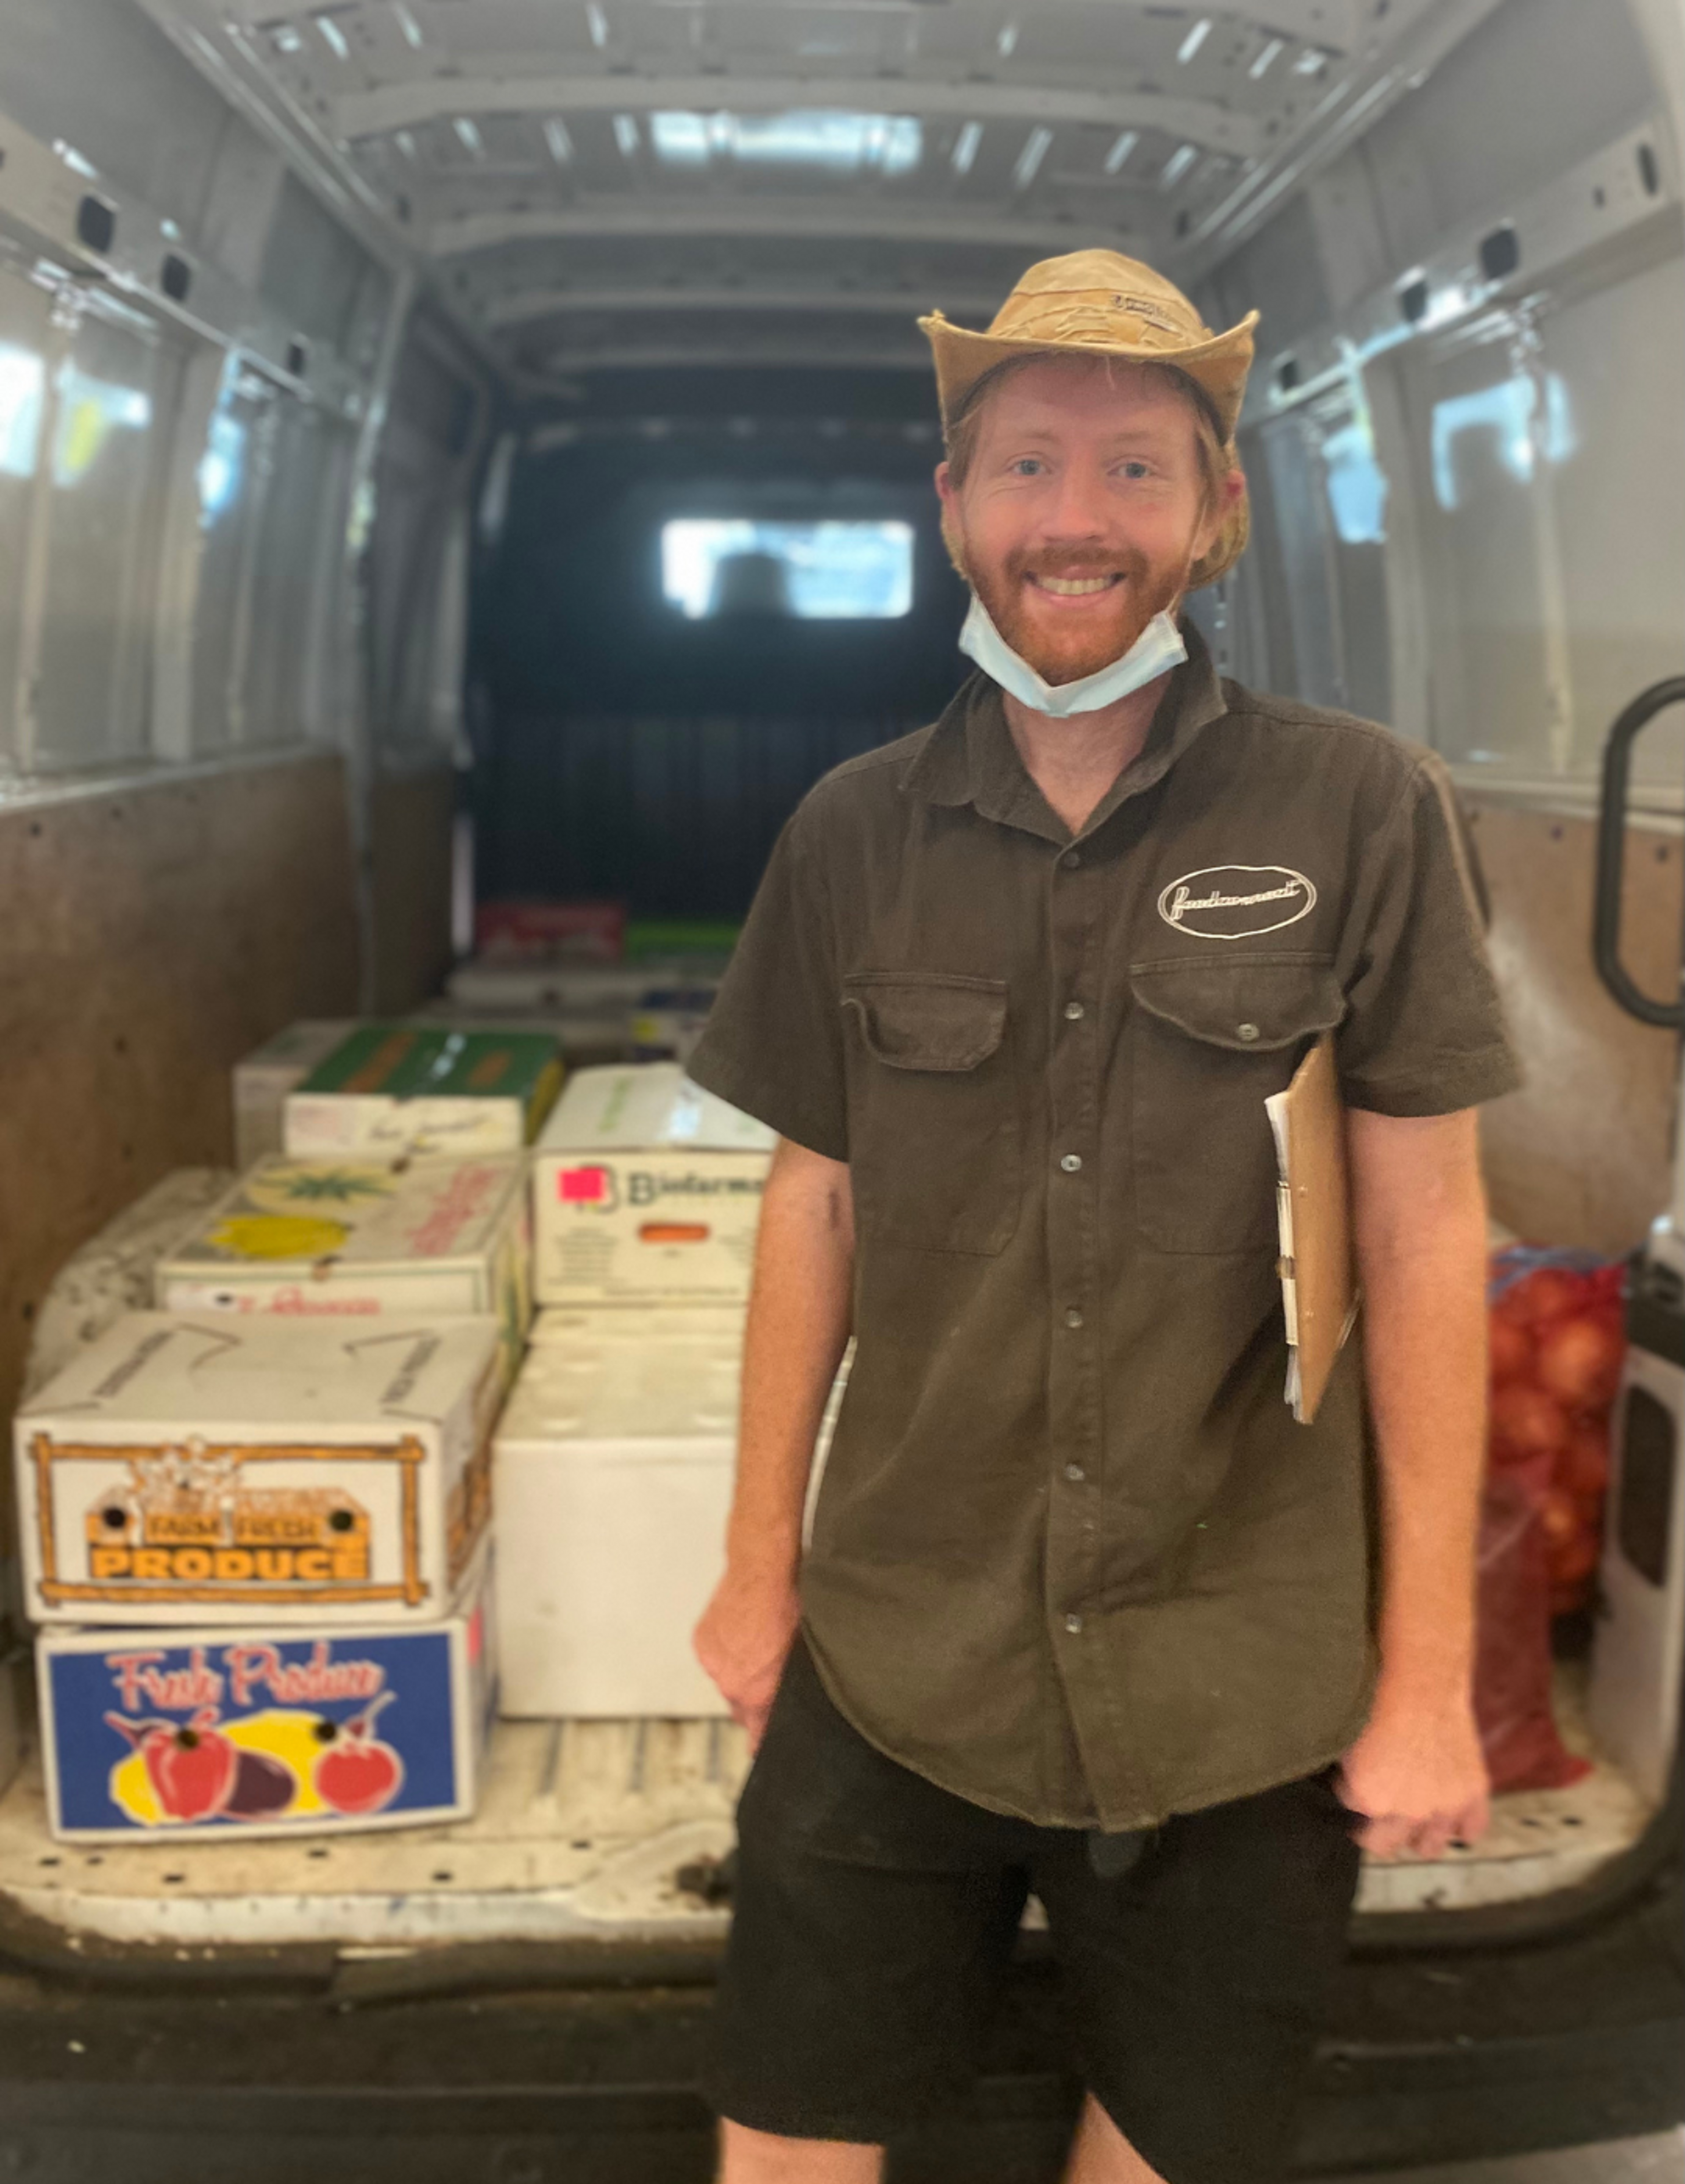 A person standing in front of the back of a van that contains some boxes of produce. They are smiling.